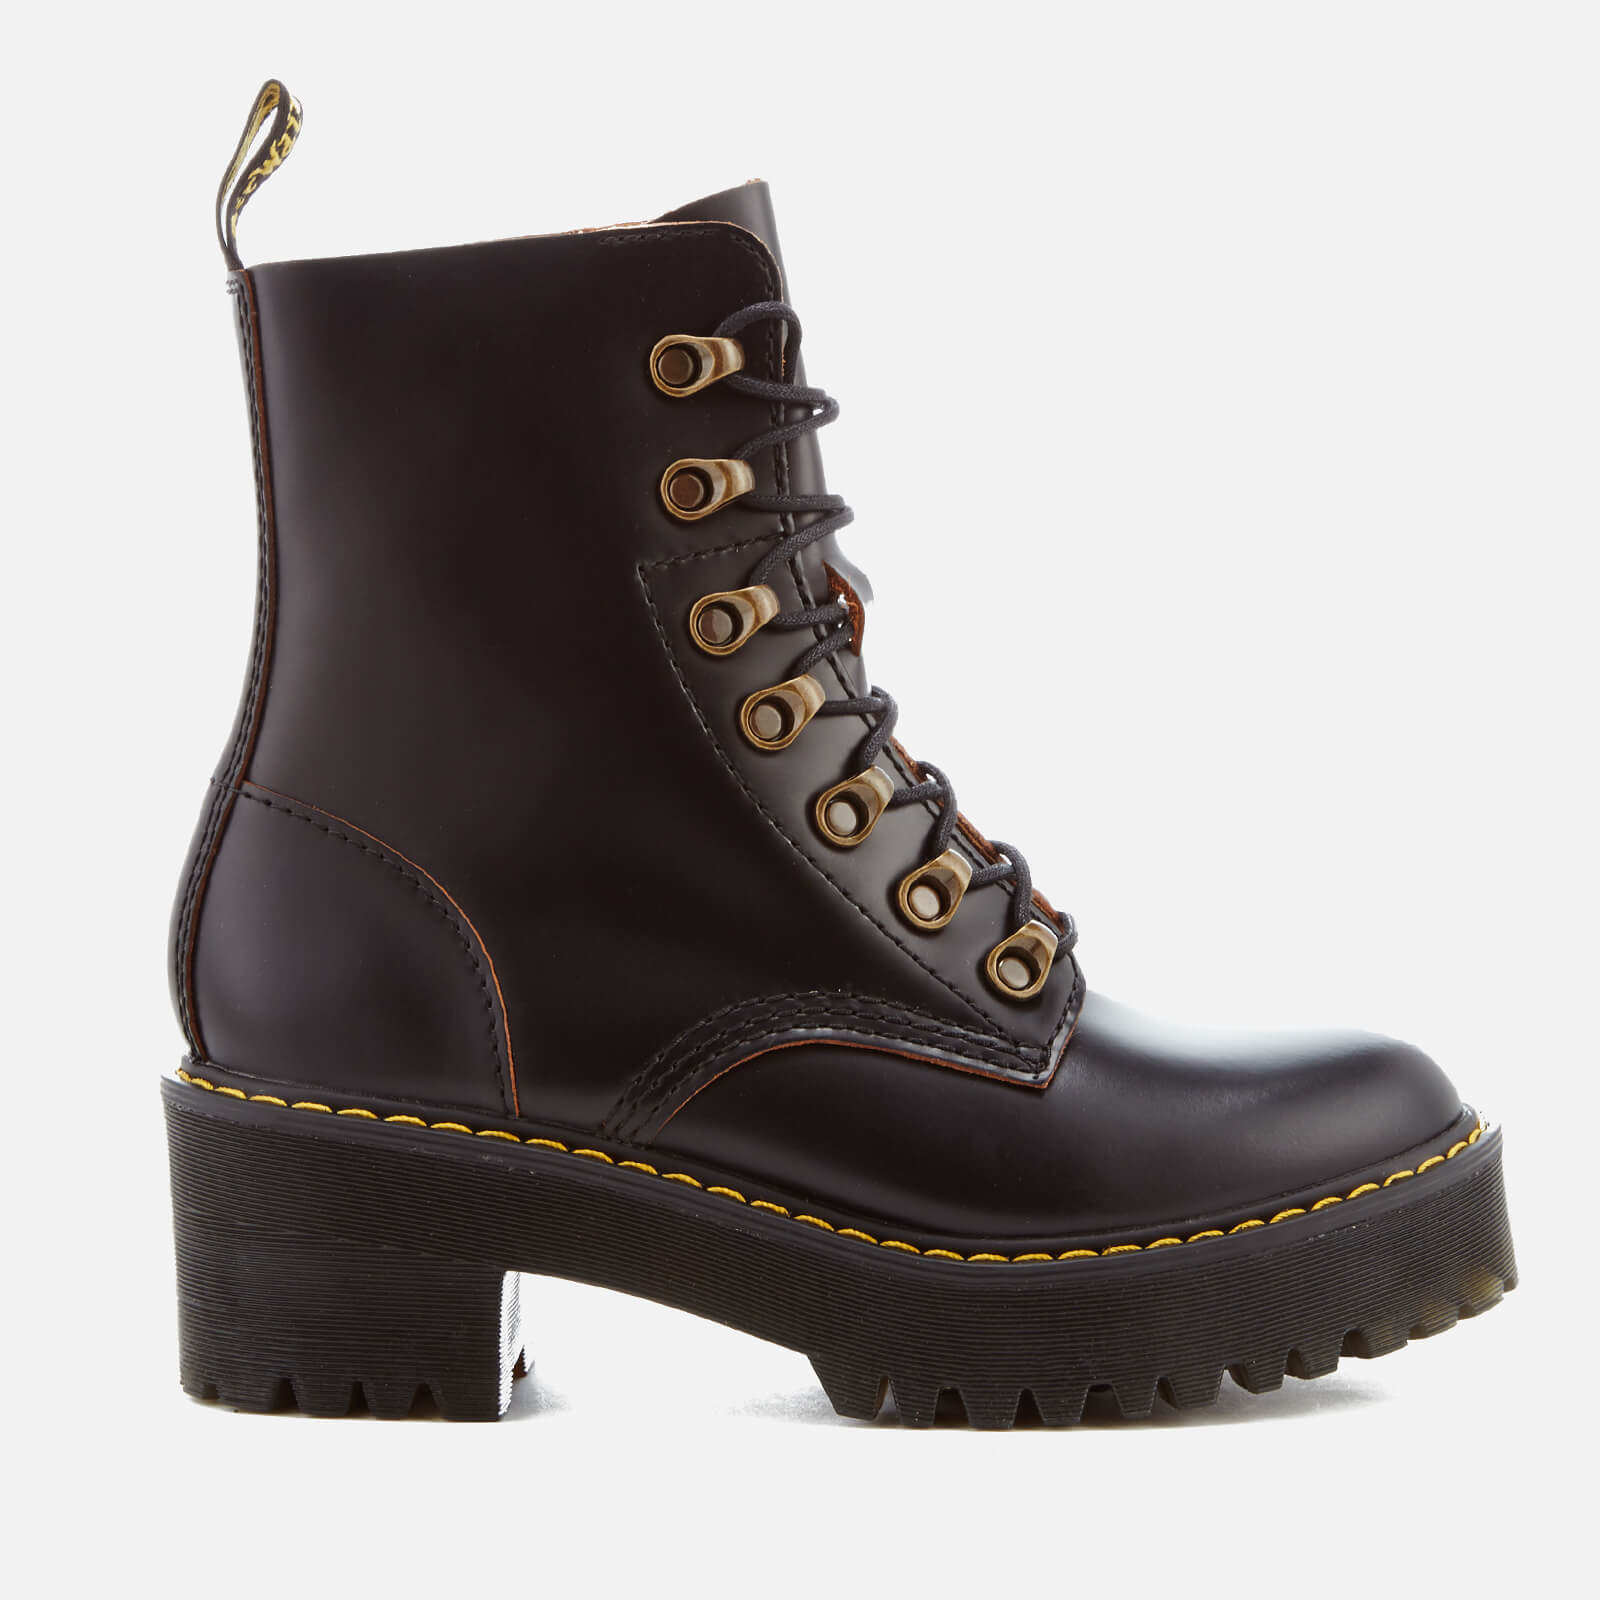 Dr. Martens Women's Leona Leather Lace Up Heeled Boots - Black - UK 3